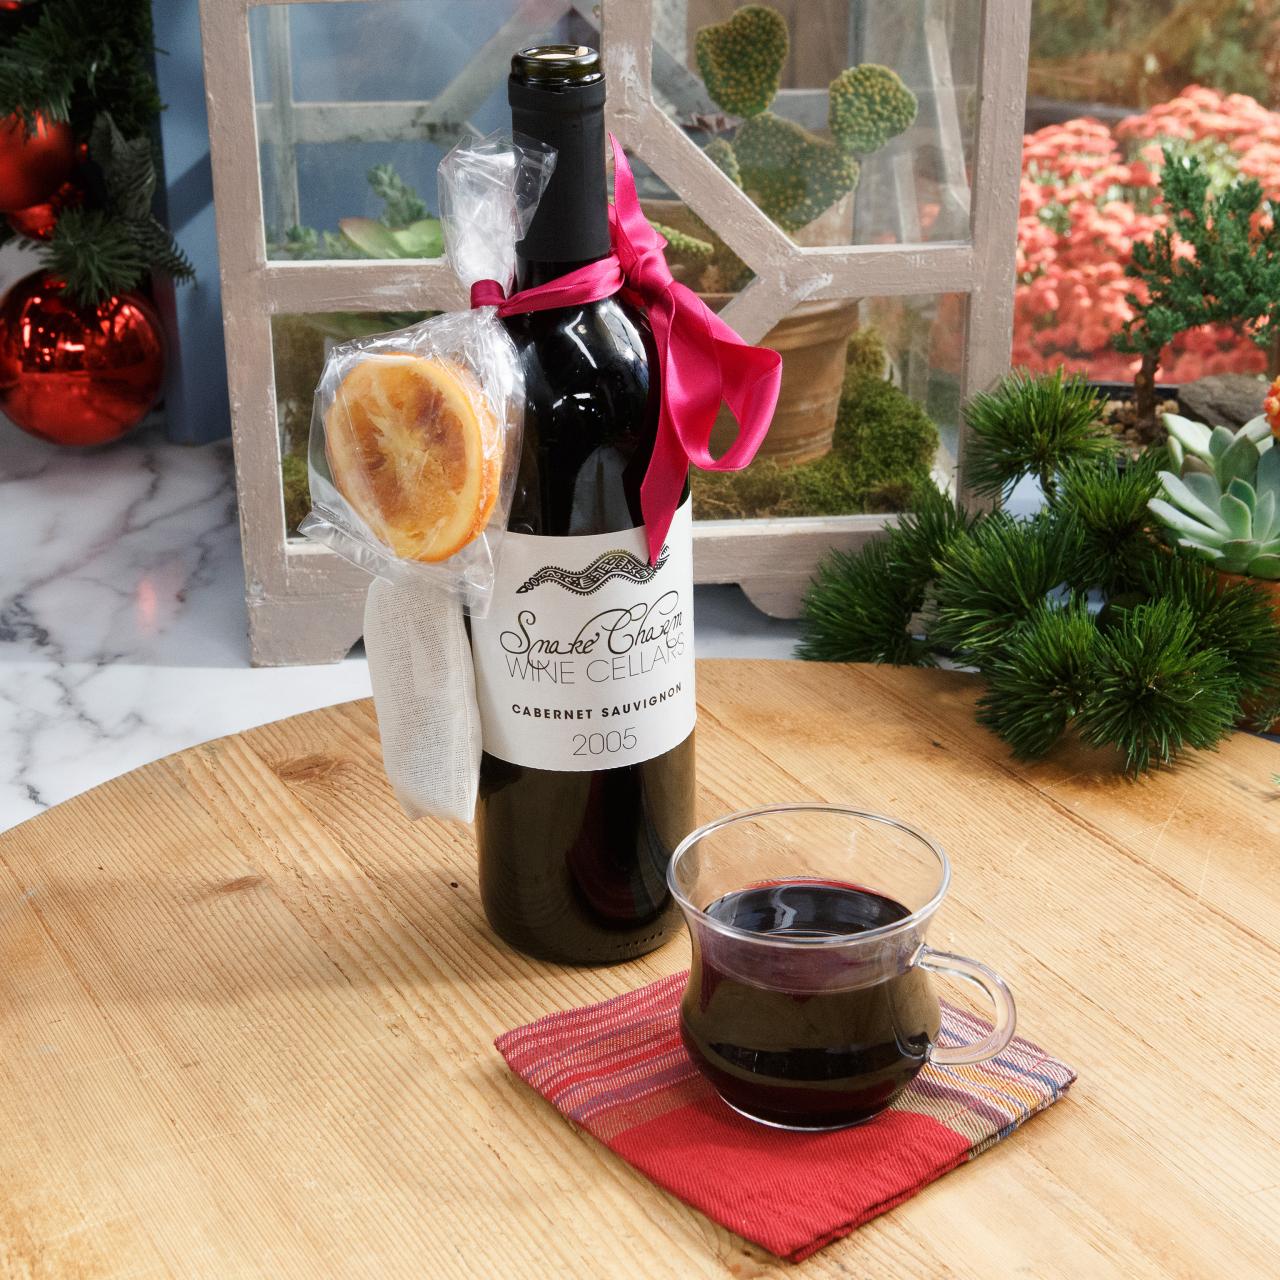  Cooking Gift Set Co., Mulled Wine Gift Set